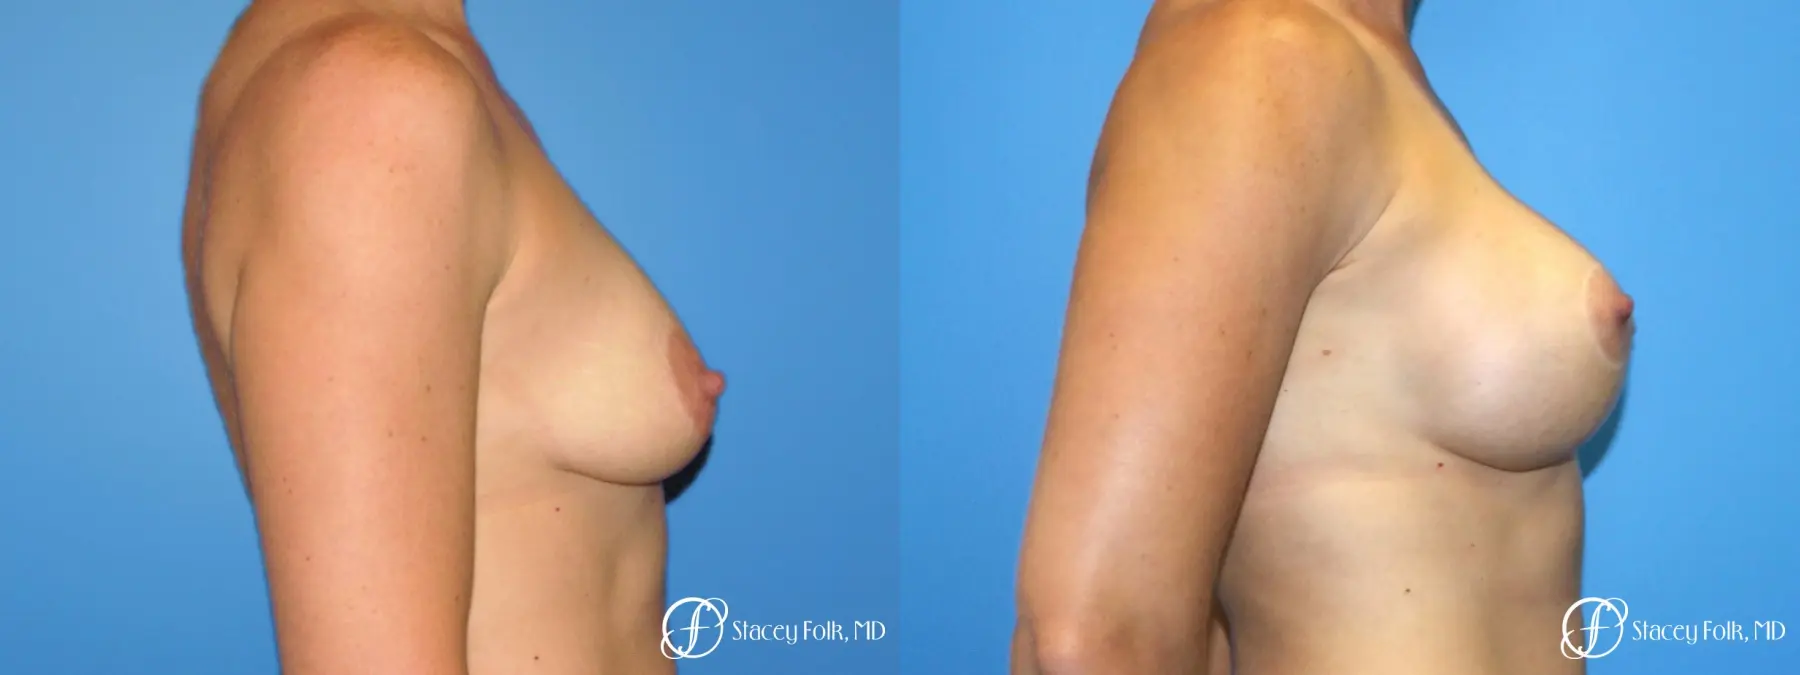 Denver Breast Augmentation with a Breast Lift - Mastopexy 8361 - Before and After 3